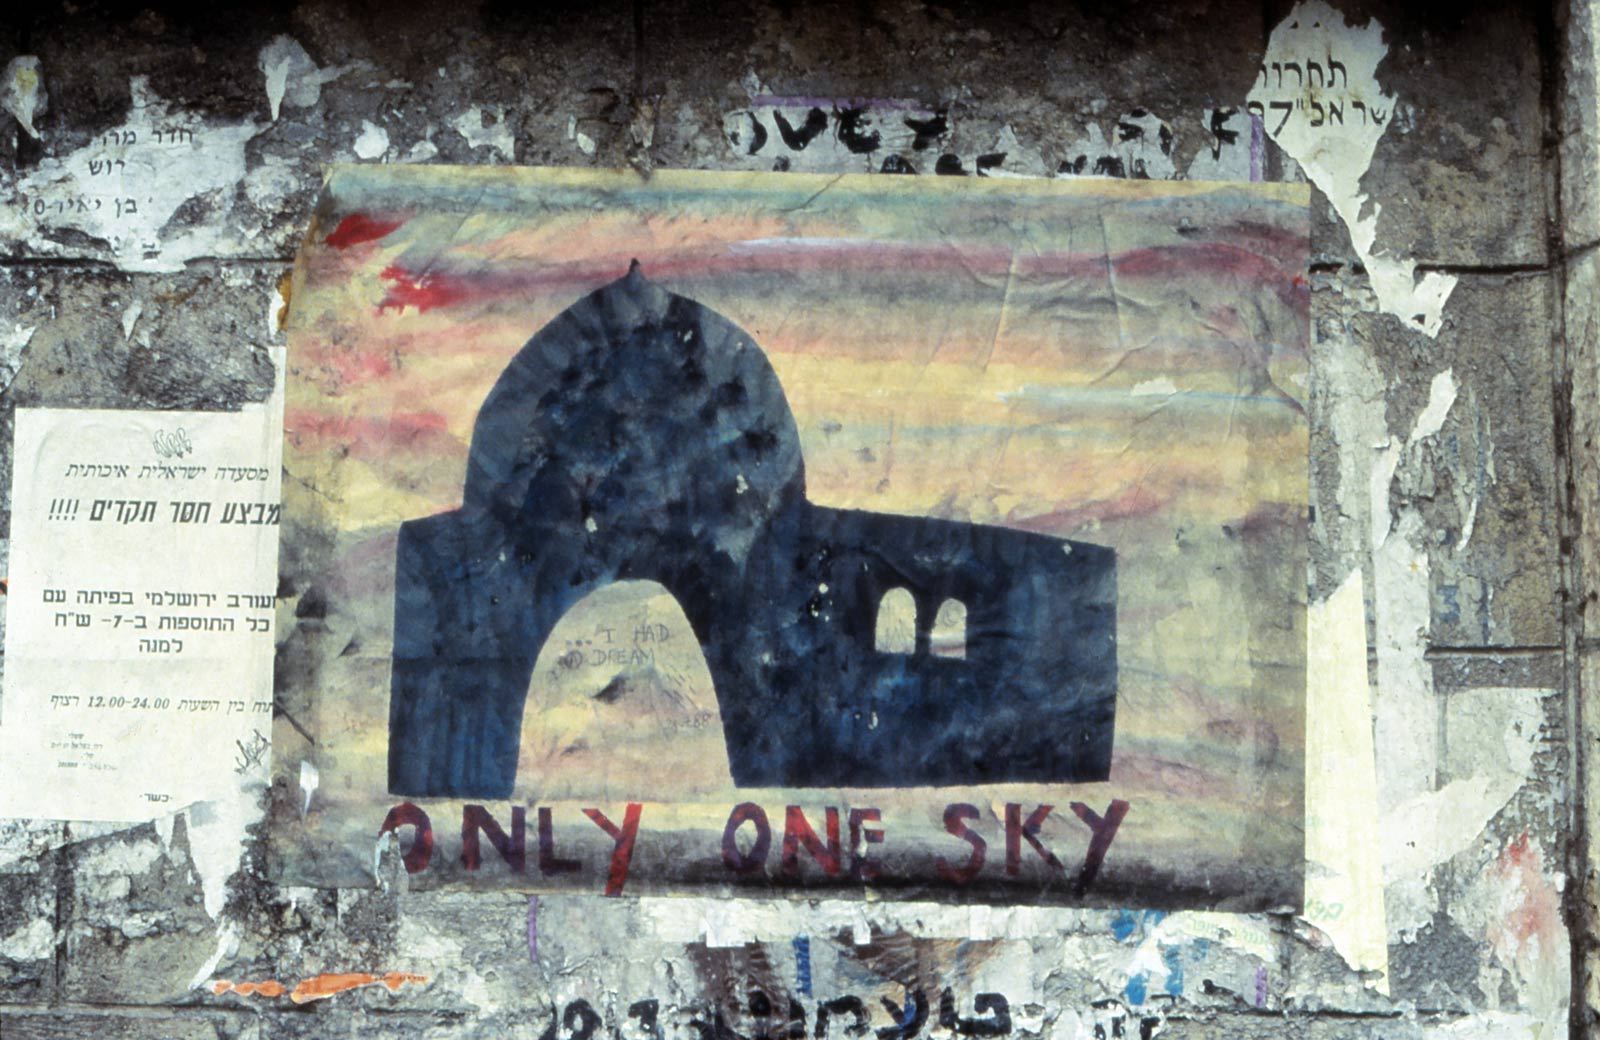 Just one Sky